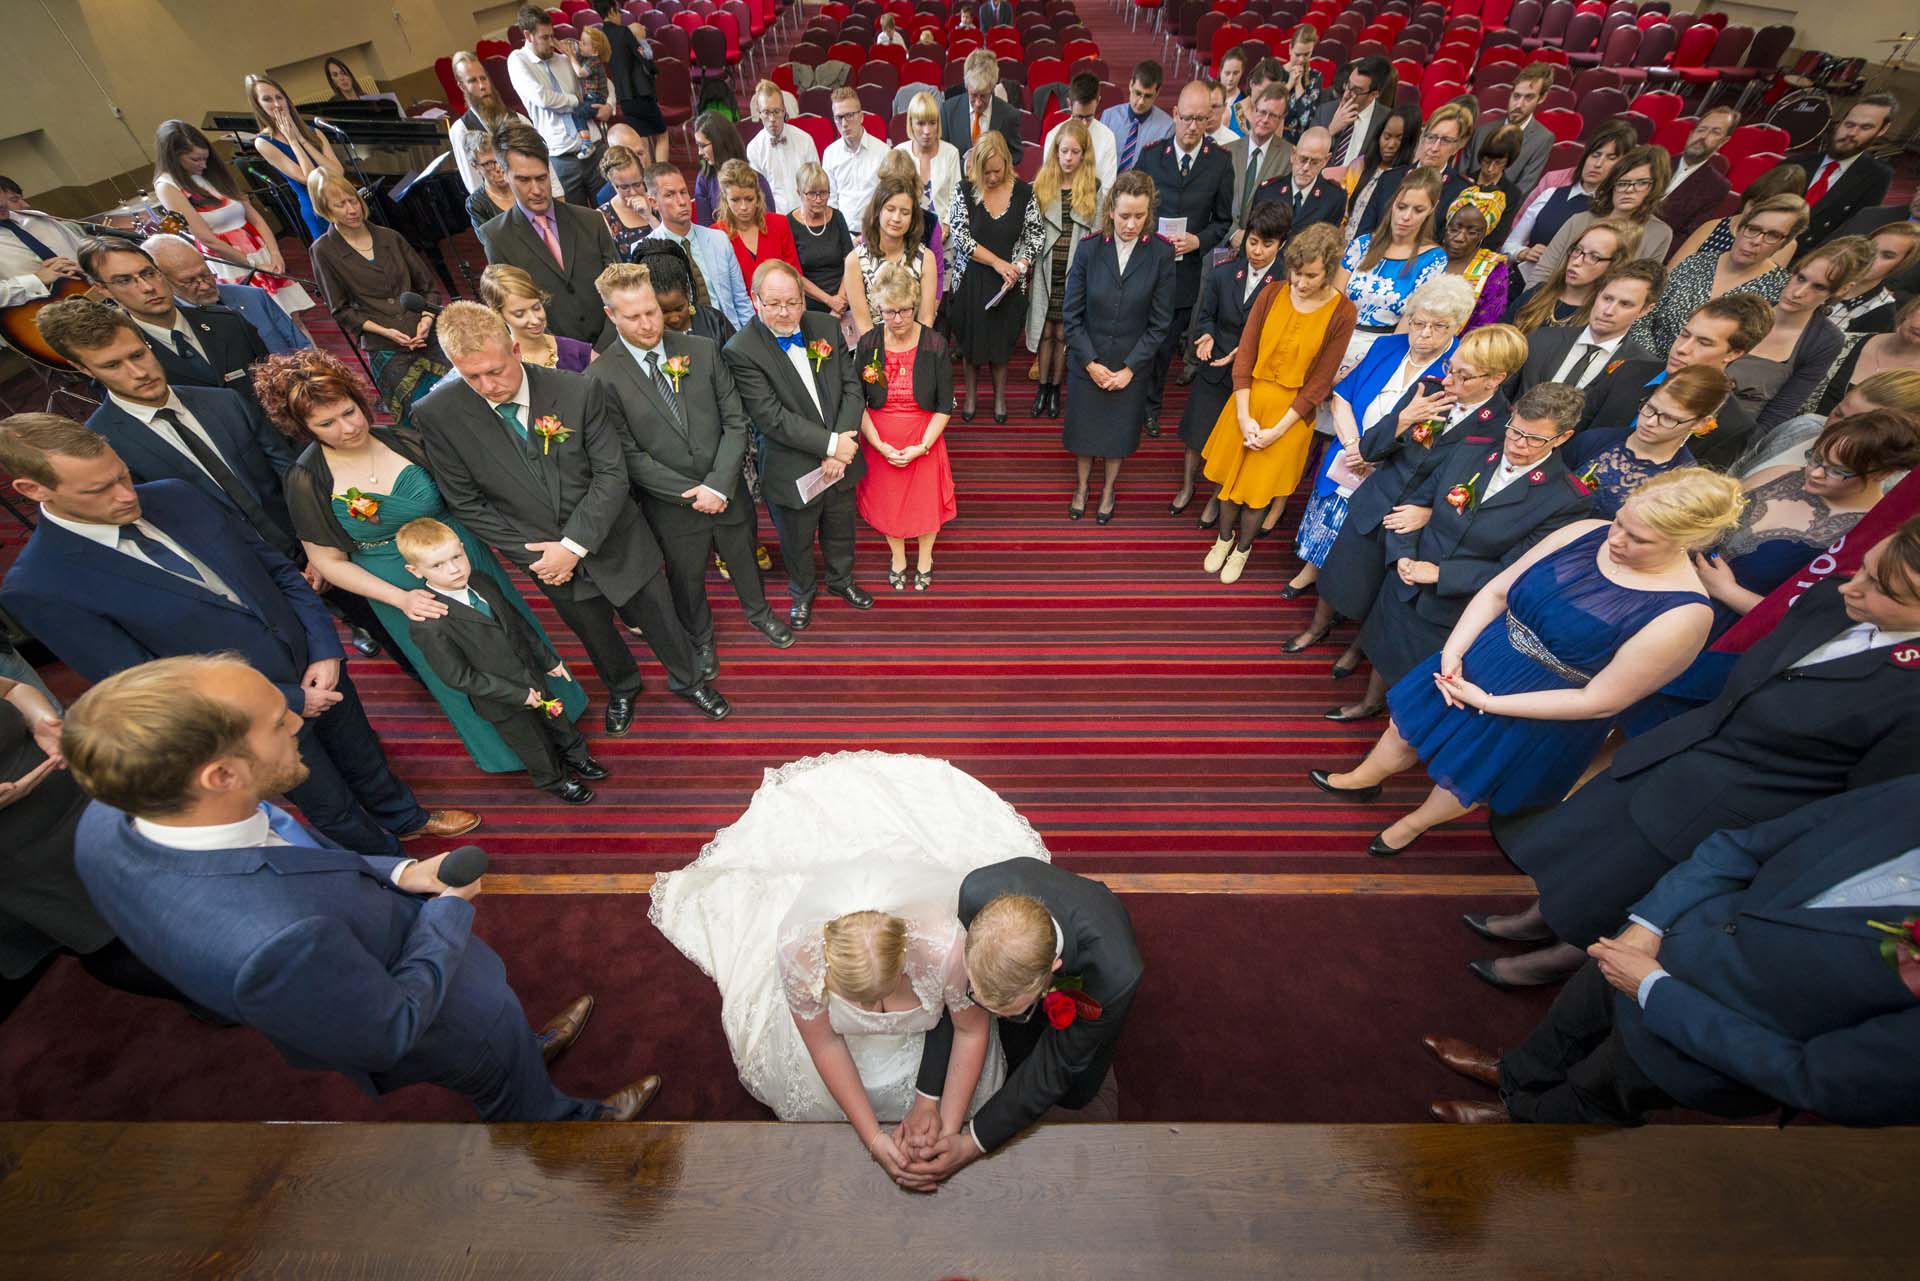 Kneeling to pray with the family gathered around Camberwell south london wedding photographer article on extreme wide angle lenses